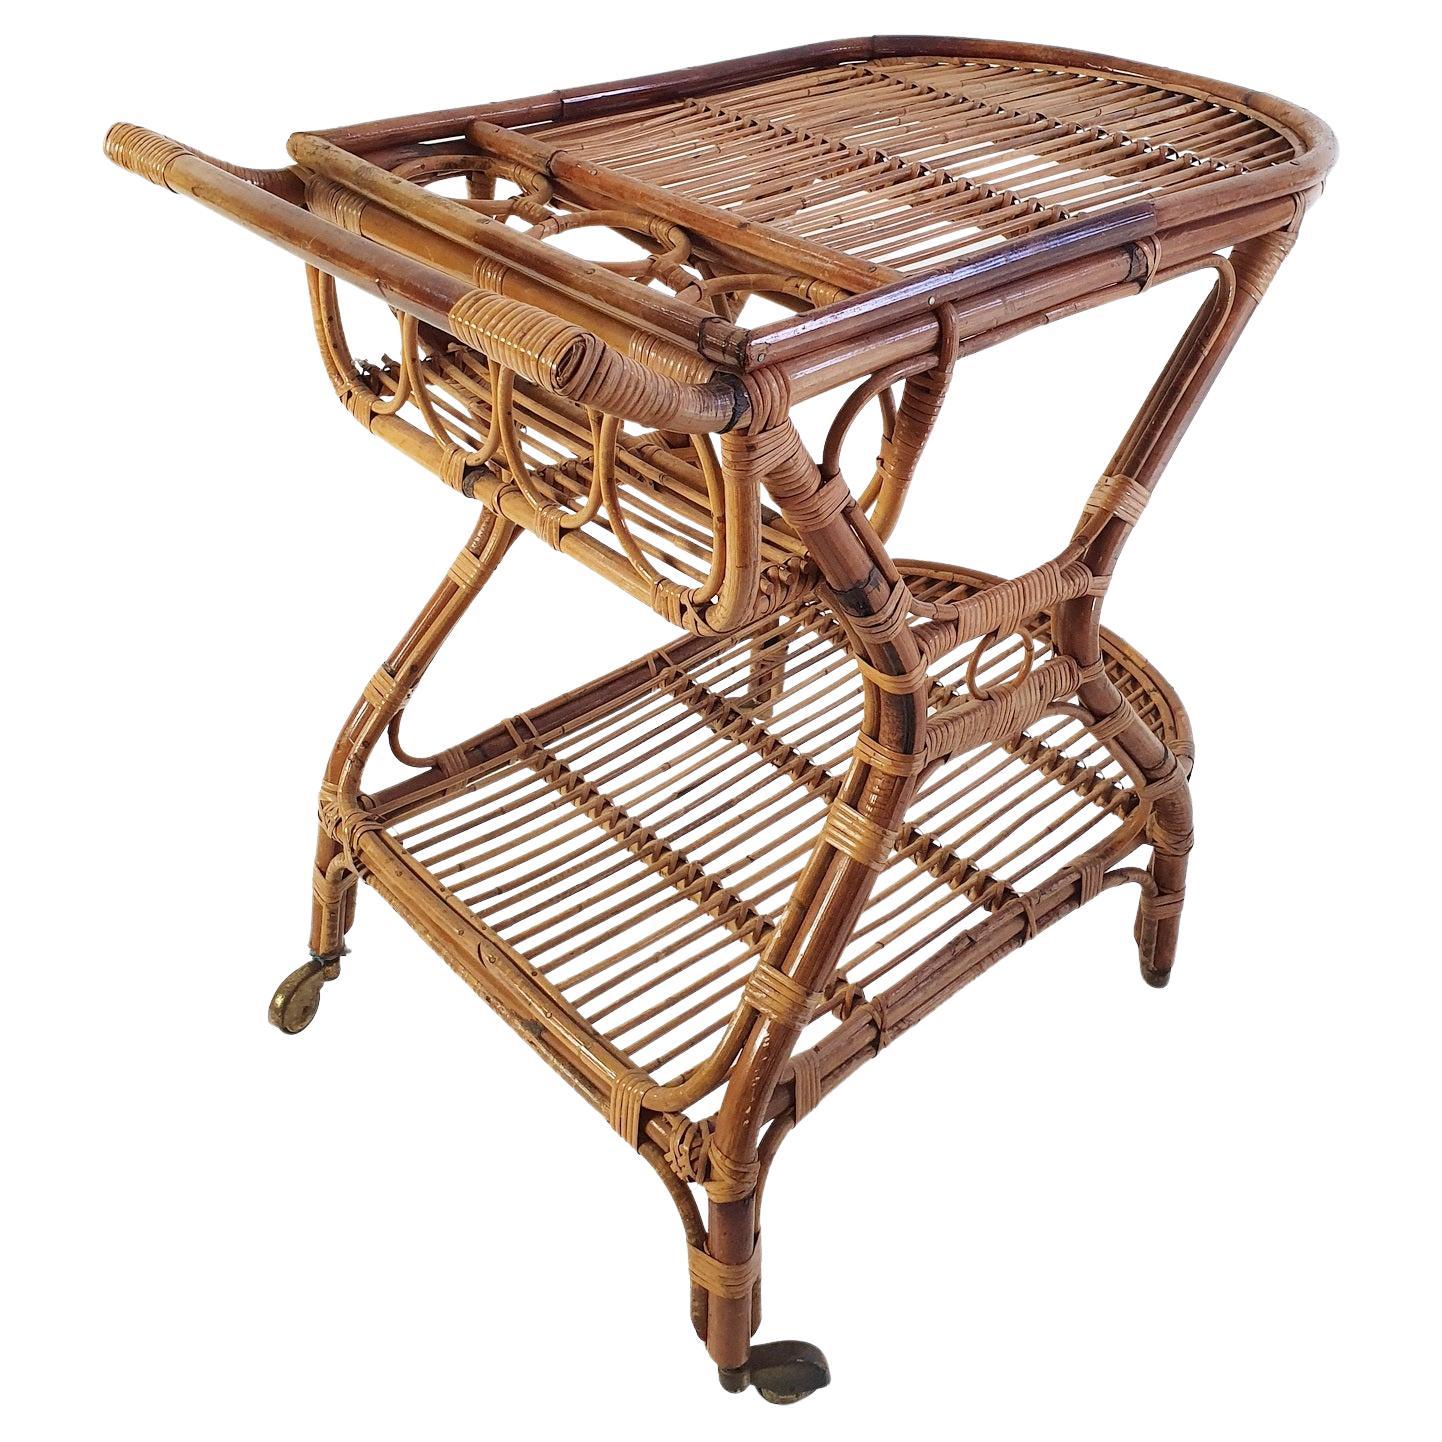 An Italian two tiered bar cart from the 1950's made from bamboo and rattan. The bar cart has holders for four bottles in total. Retains the original castors and has an overall nice condition with the original patina. All original without